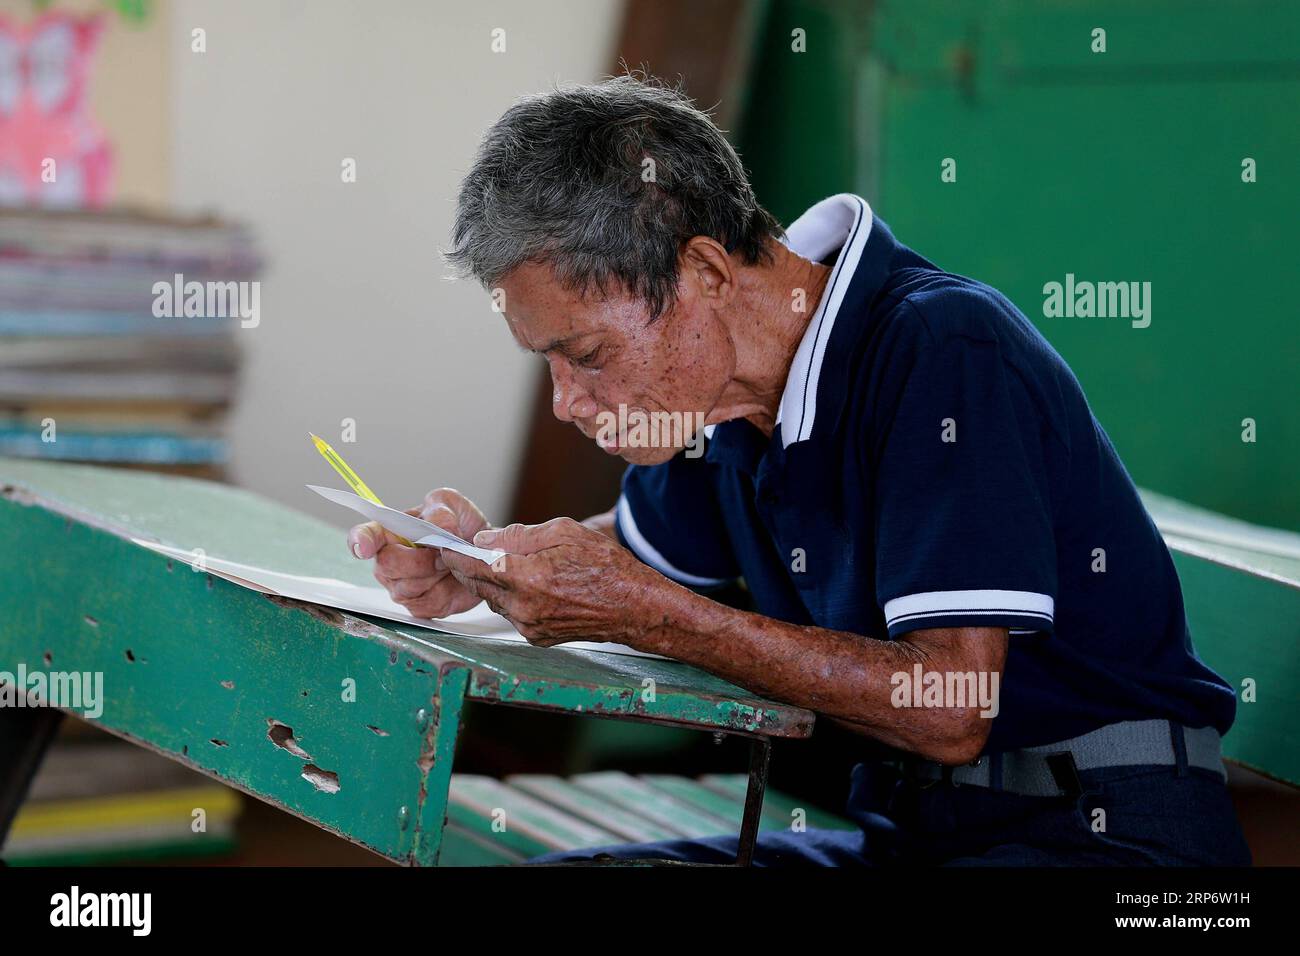 (190121) -- COTABATO CITY, Jan. 21, 2019 -- An elderly man casts his vote at a polling center in Cotabato City, the Philippines, January 21, 2019. Muslim Filipinos cast their vote on Monday to ratify the landmark Bangsamoro Organic Law (BOL), a law that would pave the way for wider self-rule to the Muslim minority in the Philippines and was hoped to end the decades-old conflict in southern Philippines. ) PHILIPPINES-COTABATO CITY-BOL-VOTE ROUELLExUMALI PUBLICATIONxNOTxINxCHN Stock Photo